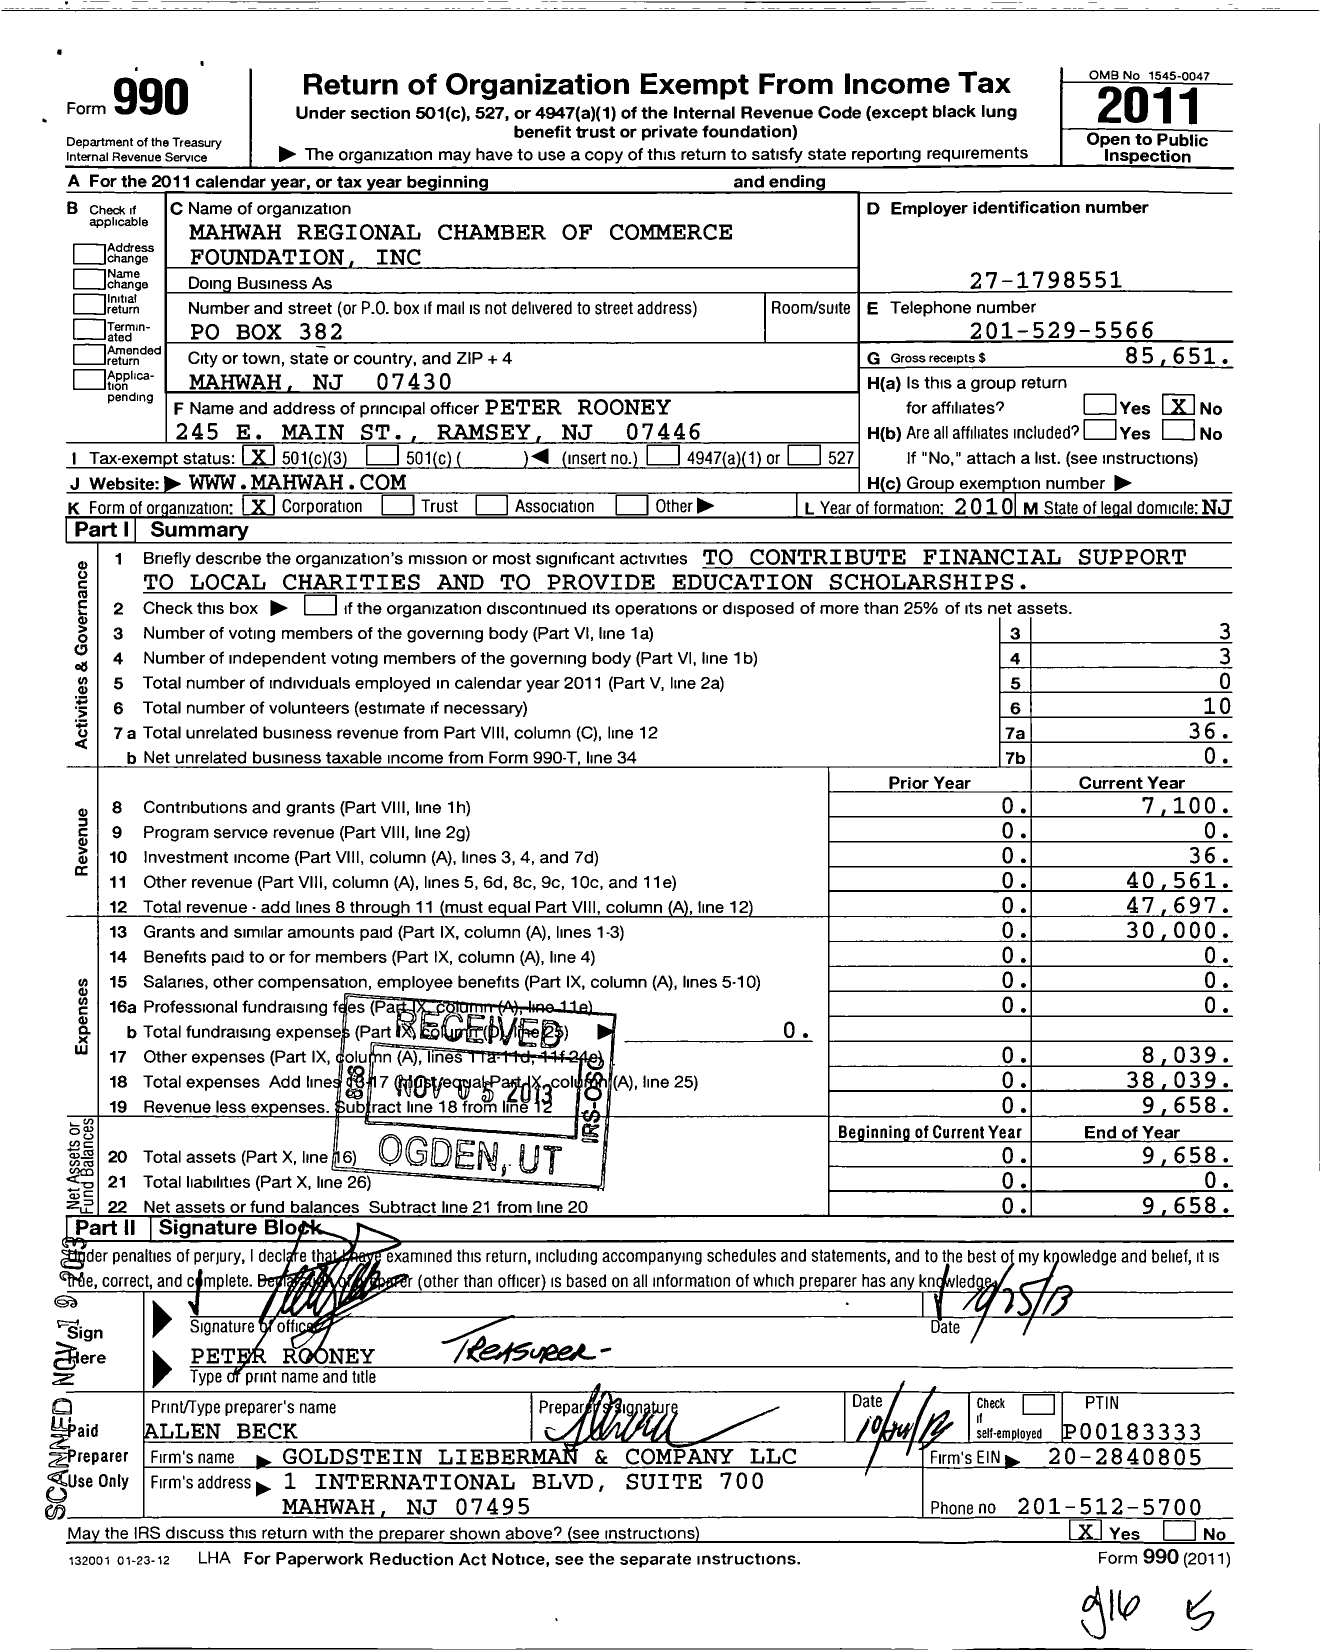 Image of first page of 2011 Form 990 for Mahwah Regional Chamber of Commerce Foundation